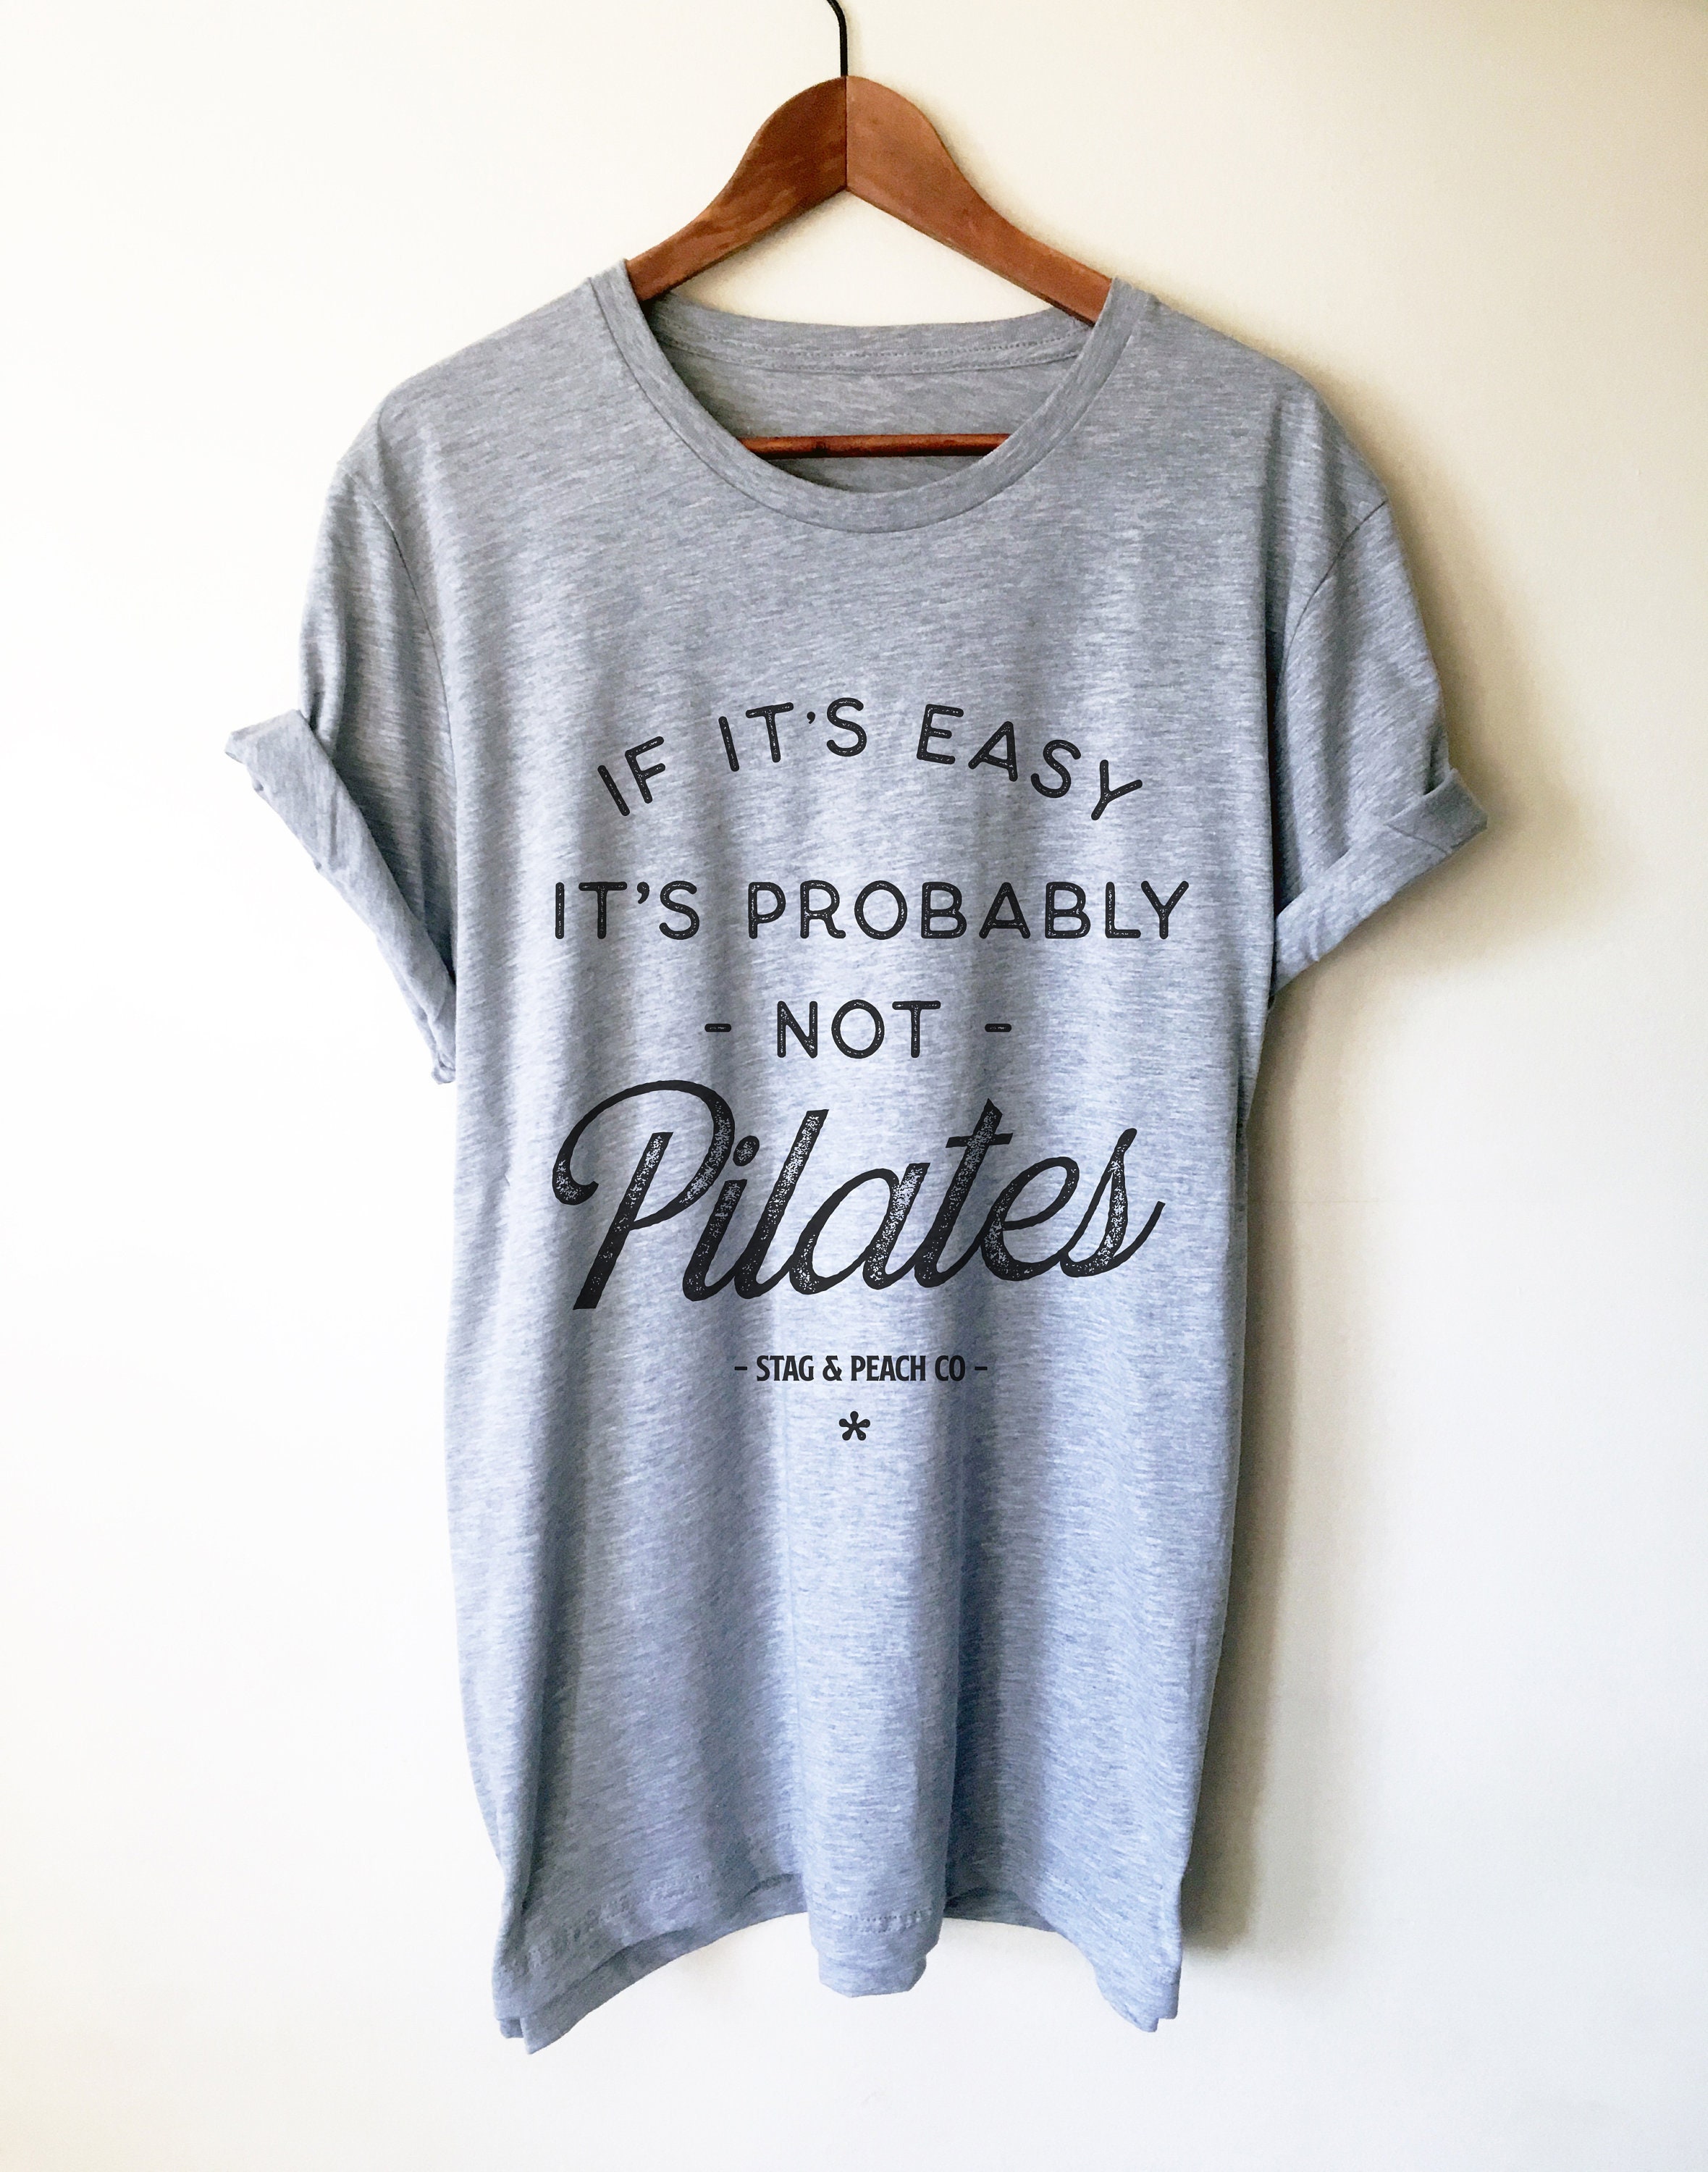 If Its Easy Its Probably Not Pilates Unisex Shirt Pilates Shirt, Pilates  Gift, Pilates Clothes, Pilates Instructor, Pilates Workout 